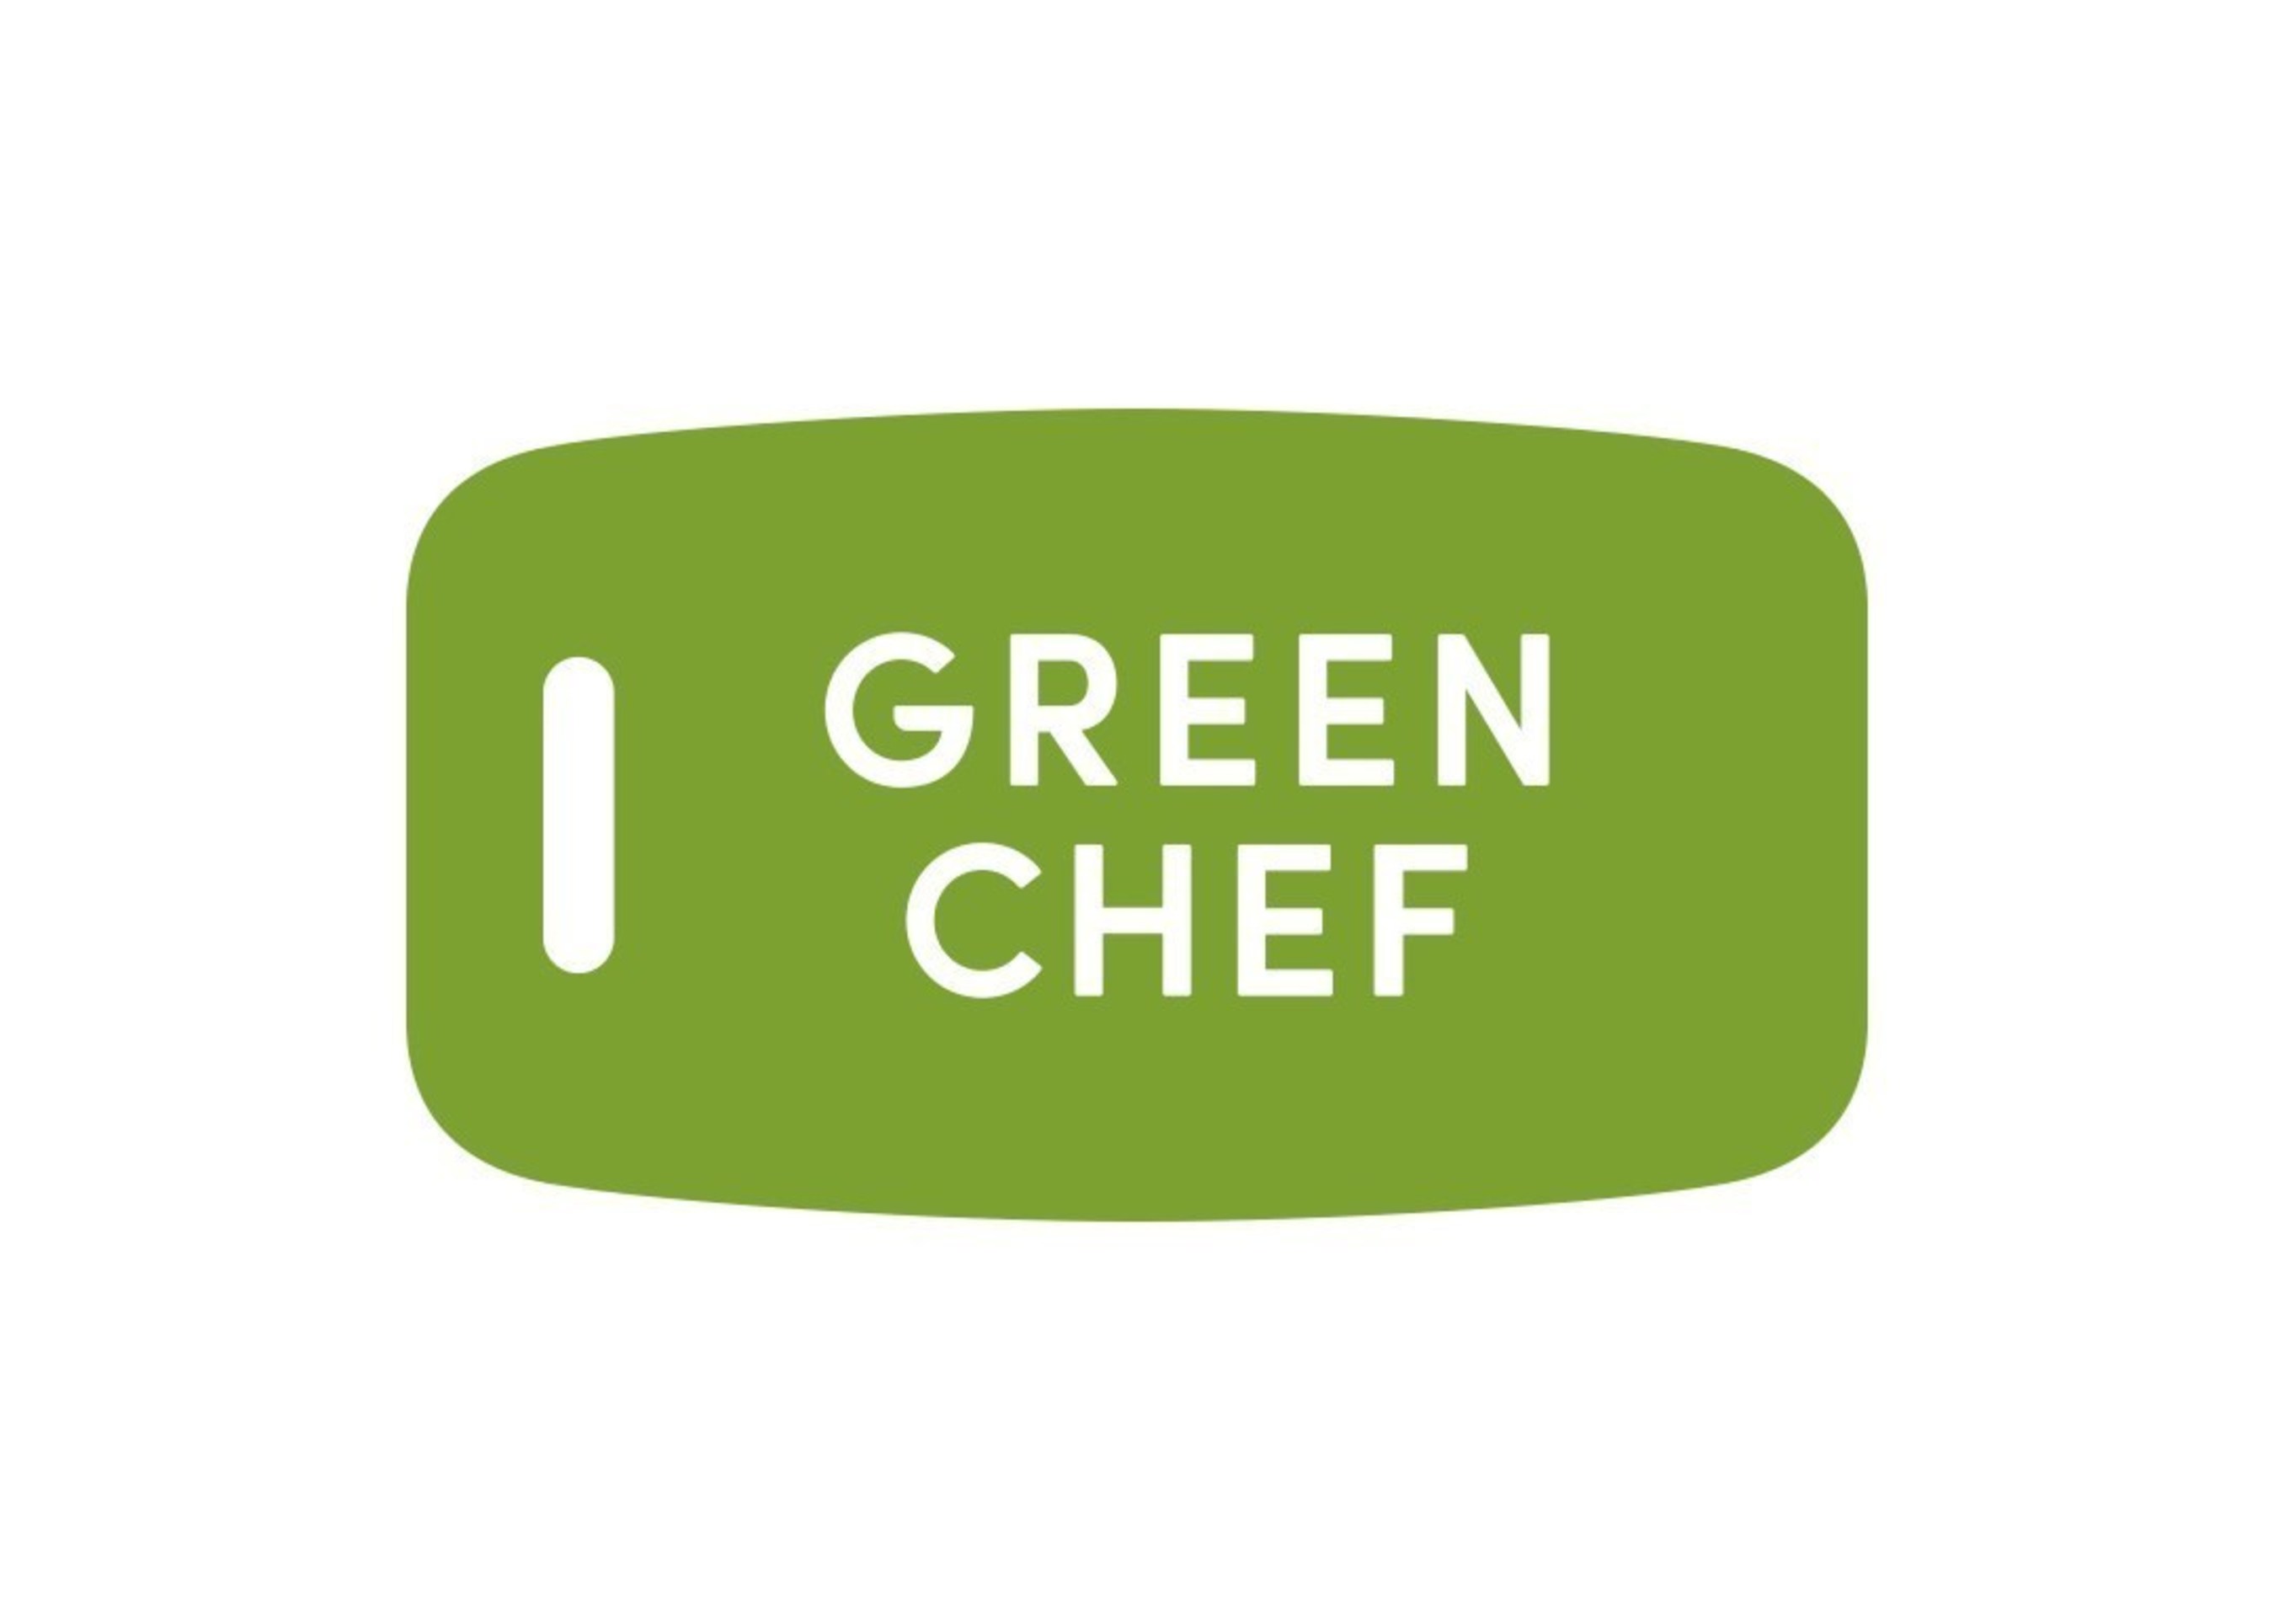 Green Chef Meal Kit Ranking